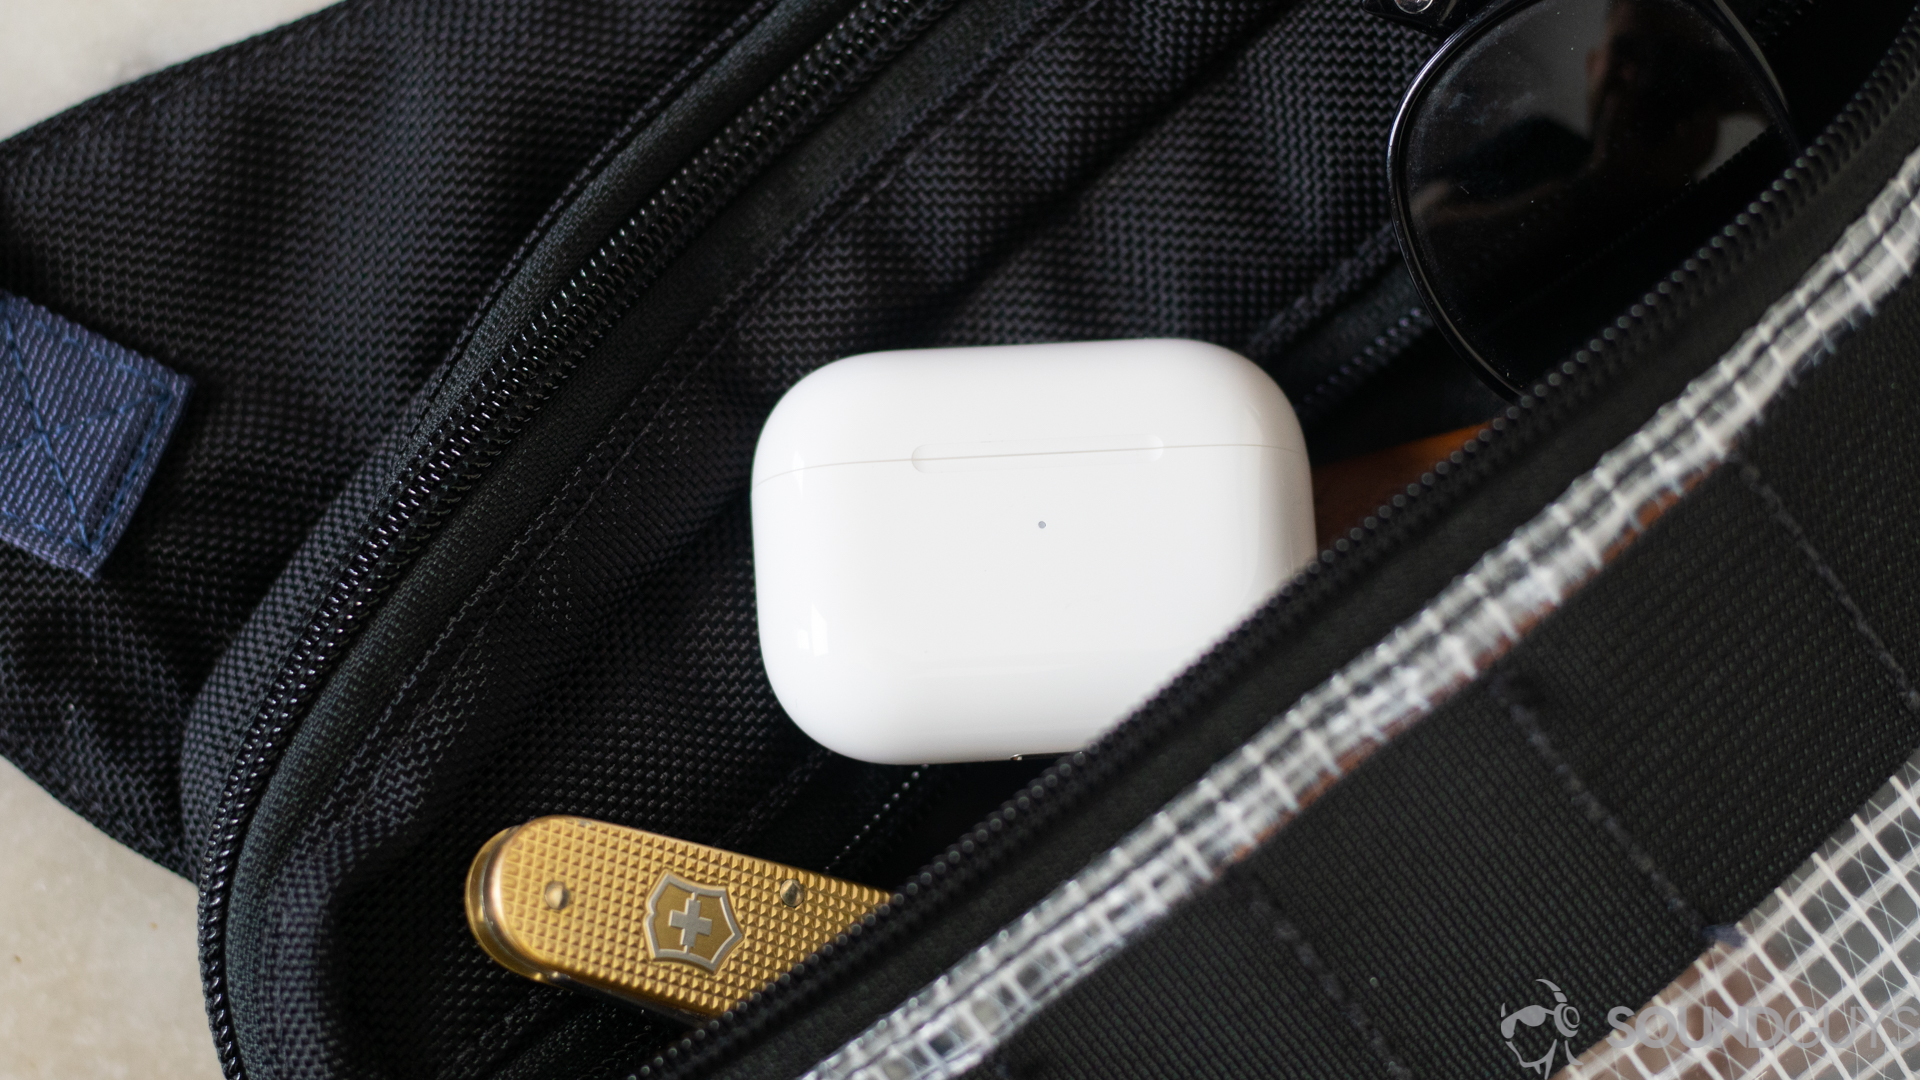 The charging case sticking out from a zippered bag pocket next to sunglasses and a swiss army knife. 